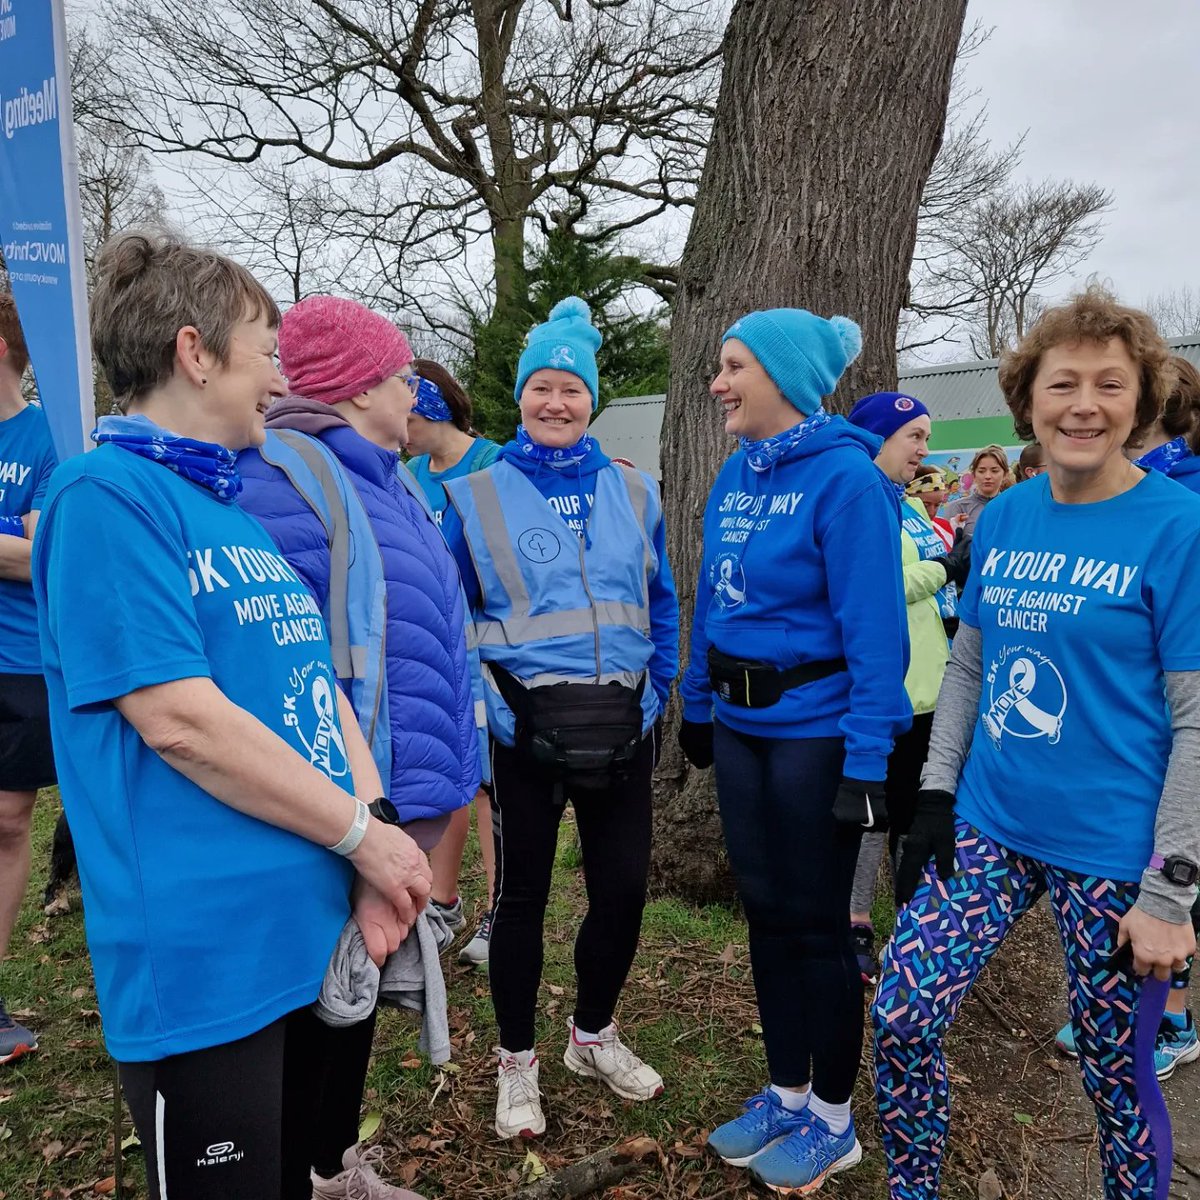 Our @shrewsburygroup had a brilliant turnout this morning for their first meet up of 2024! Lots of friendly chat as we walked, jogged, ran and volunteered at @shrewsparkrun 💙 A café takeover afterwards at @stopcoffeeshop finished it off perfectly ☕️🍰💙